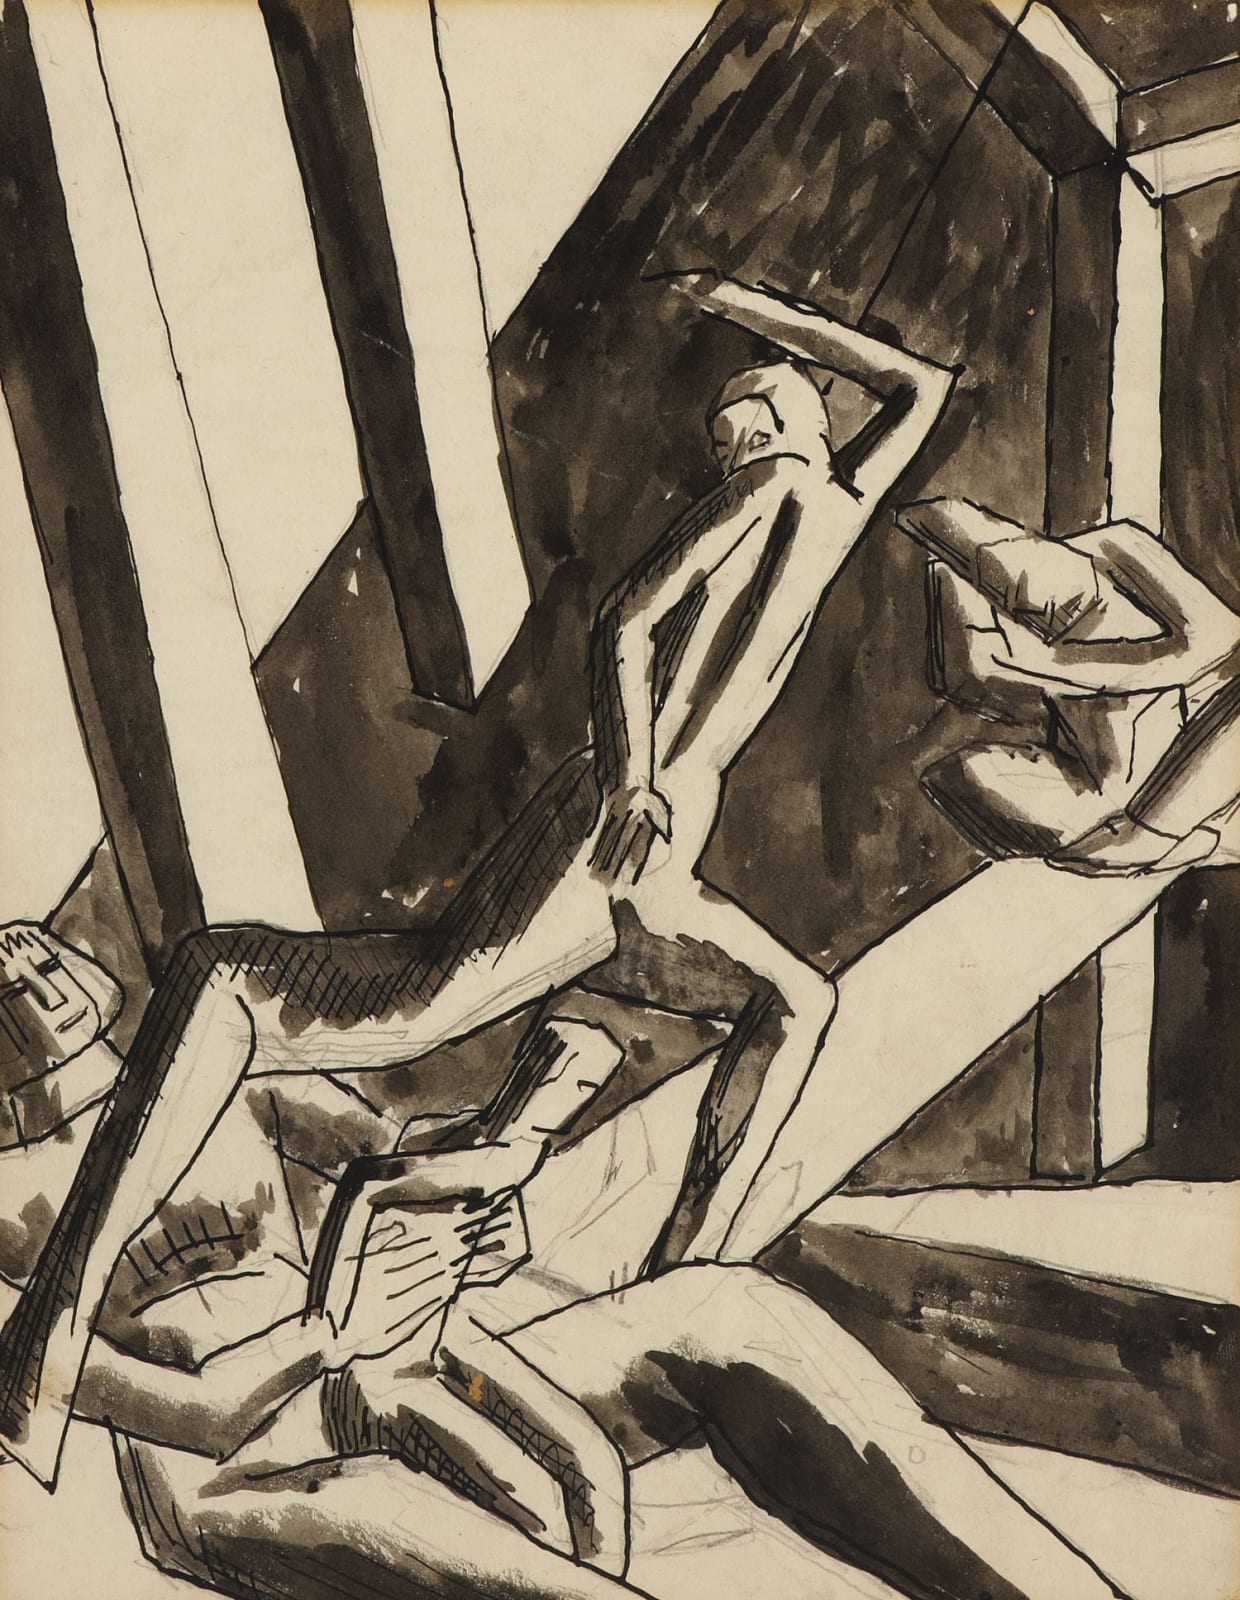 David Bomberg (1890-1957) The Family (Study for Ghetto Theatre II) 1919 Pencil, ink and wash on paper 25.4 x 19.7 cm Ben Uri Collection © David Bomberg estate To see and discover more about this artist click here